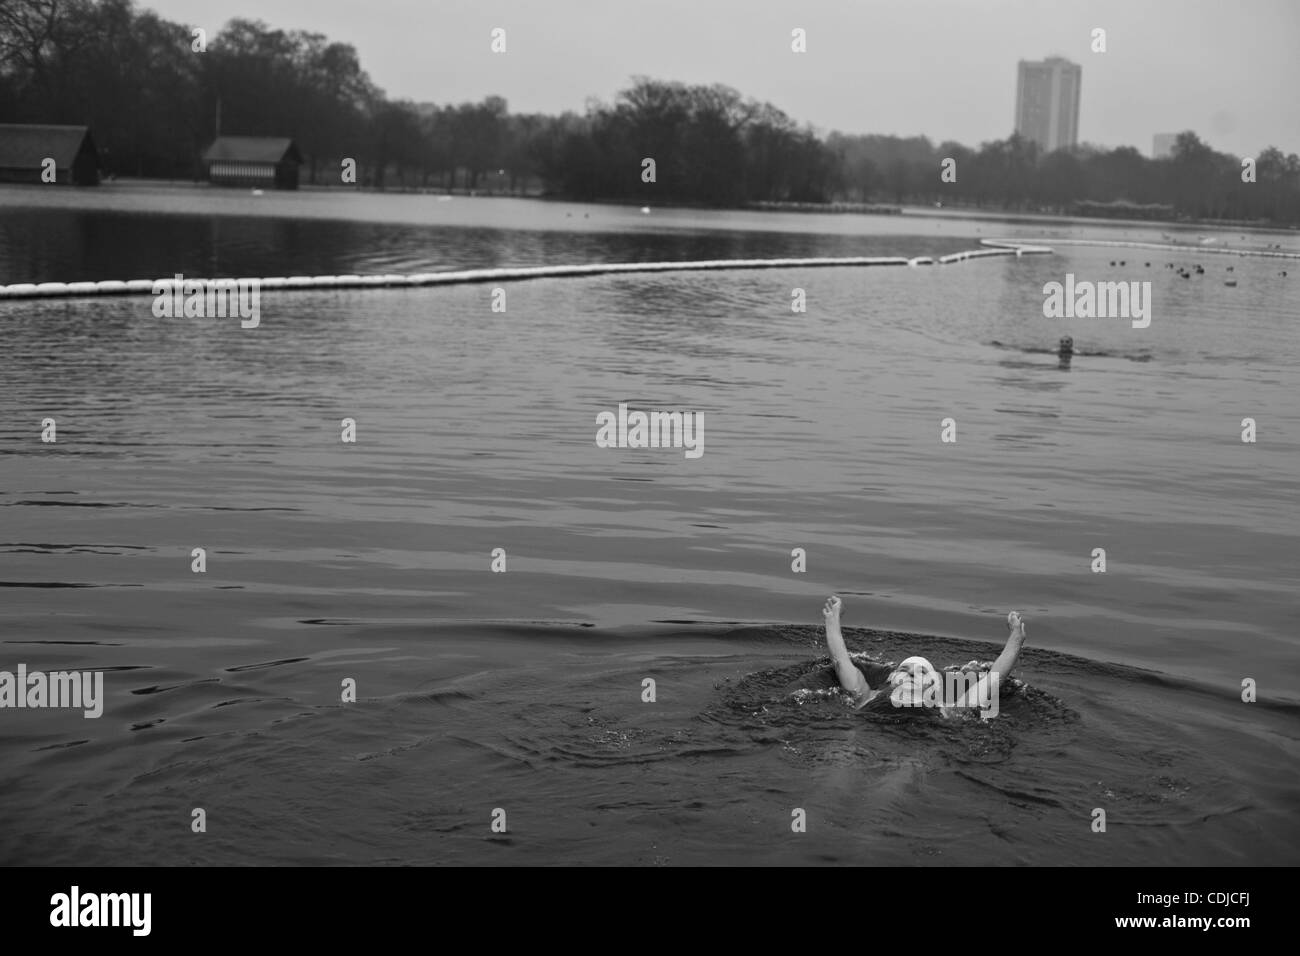 Feb 23, 2011 - London, England, United Kingdom - Ennie has been swimming in wintery waters for eleven years. Rain or shine, winter or summer - Serpentine Swimming Club members gather at the Serpentine Lido in Hyde Park all year long. The Serpentine Swimming Club is one of the oldest swimming clubs i Stock Photo